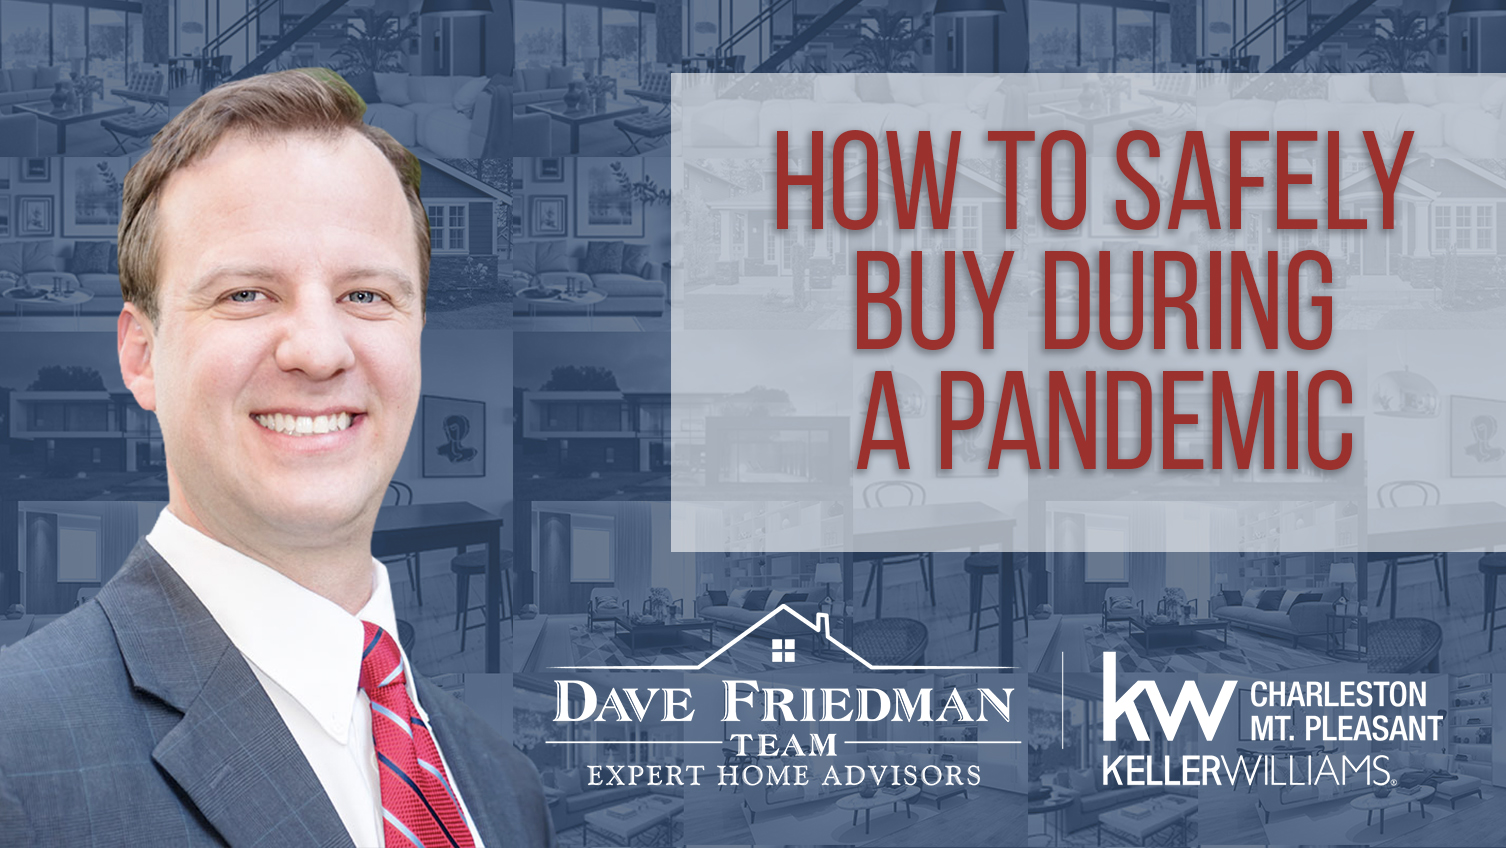 Q: Can Buyers Safely Purchase a Home Right Now?